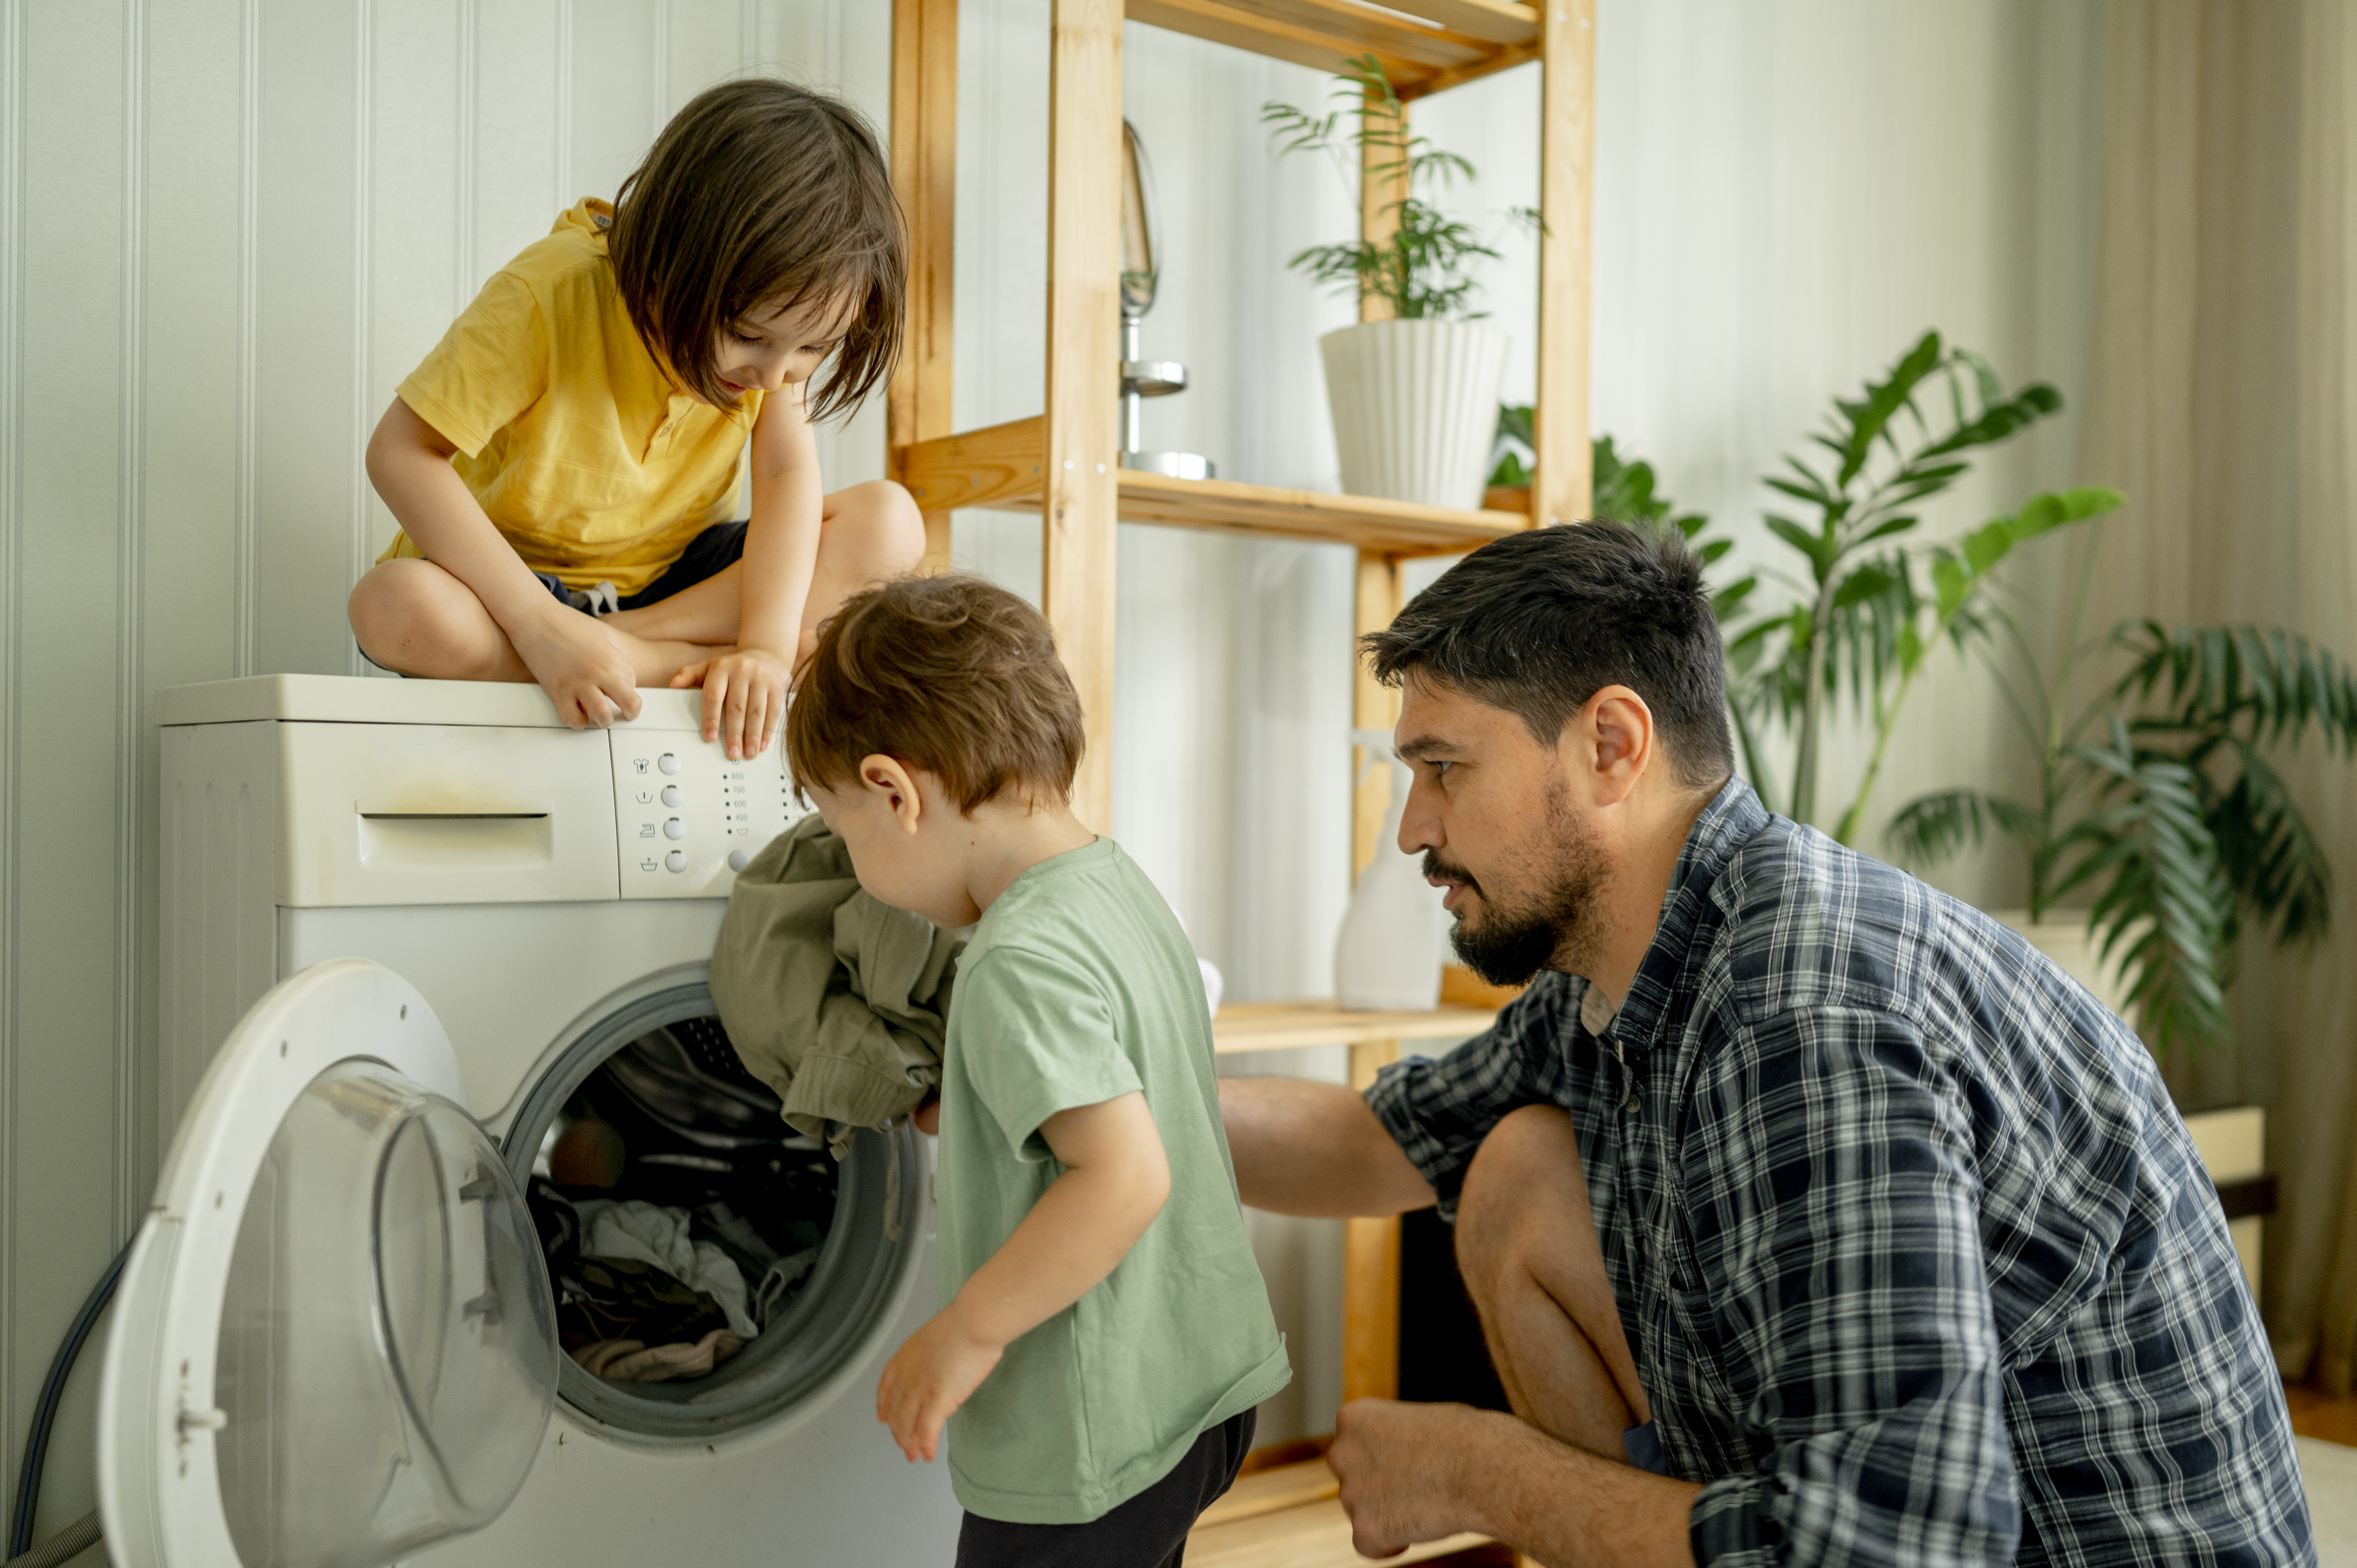 Father with children helping washing clothes in machine at home | Source: Getty Images